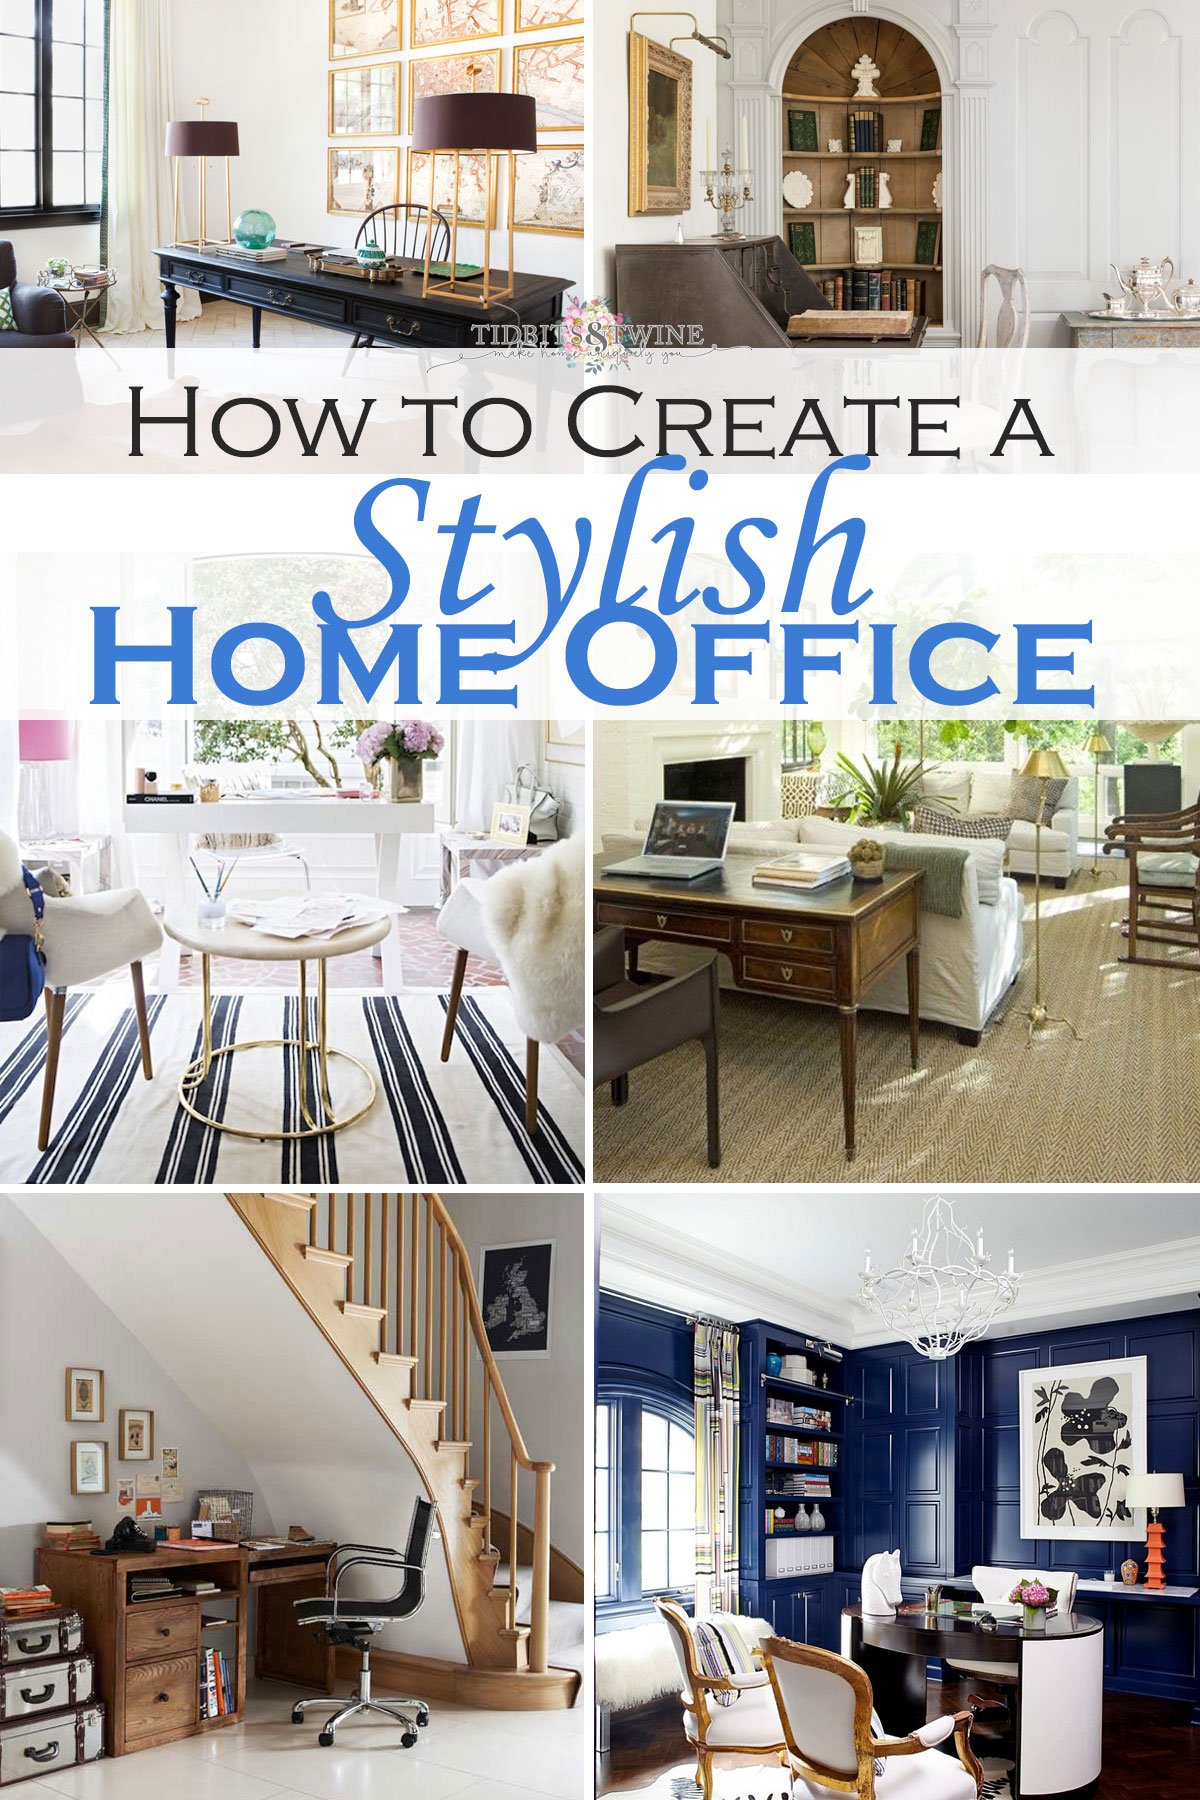 10 Tips to Create a Stylish Home Office